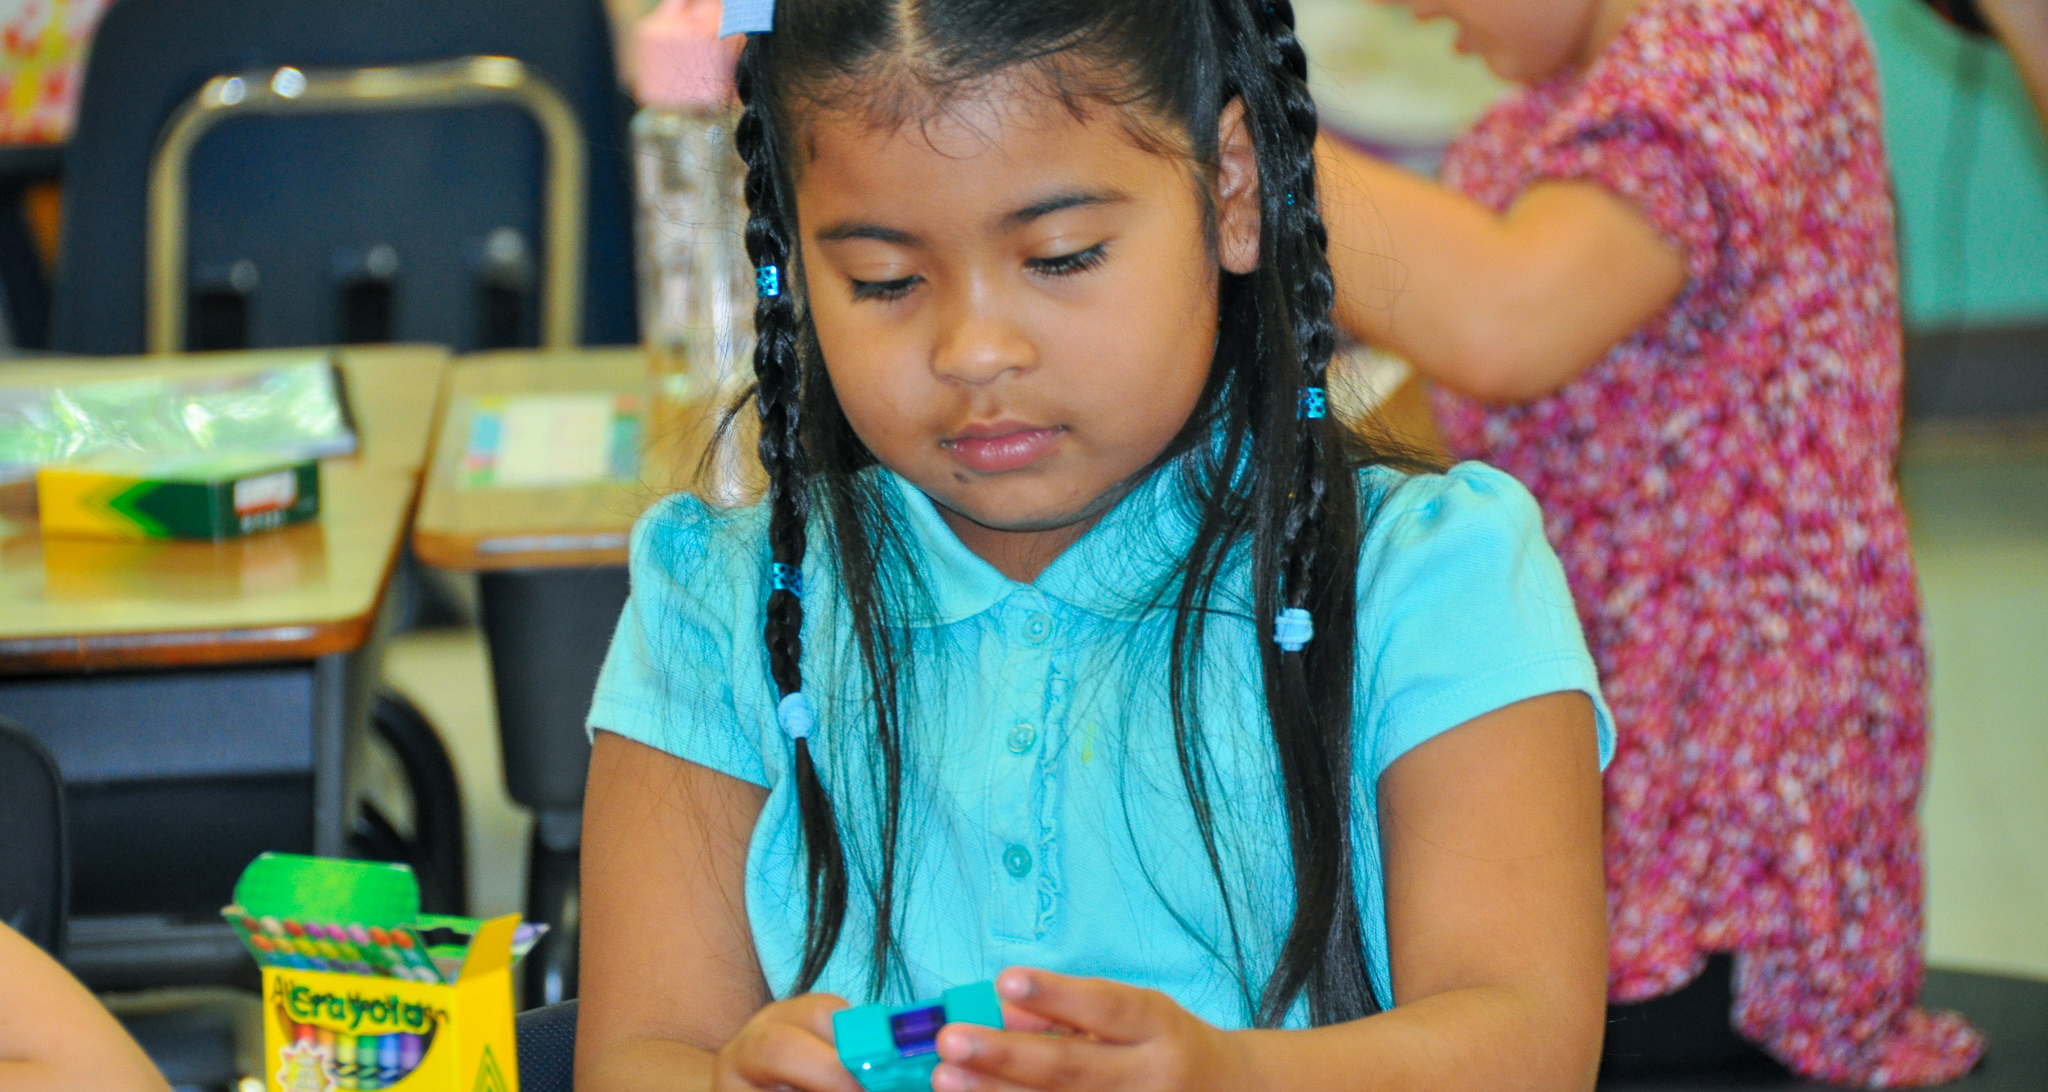 A girl playing with a plastic toy in class